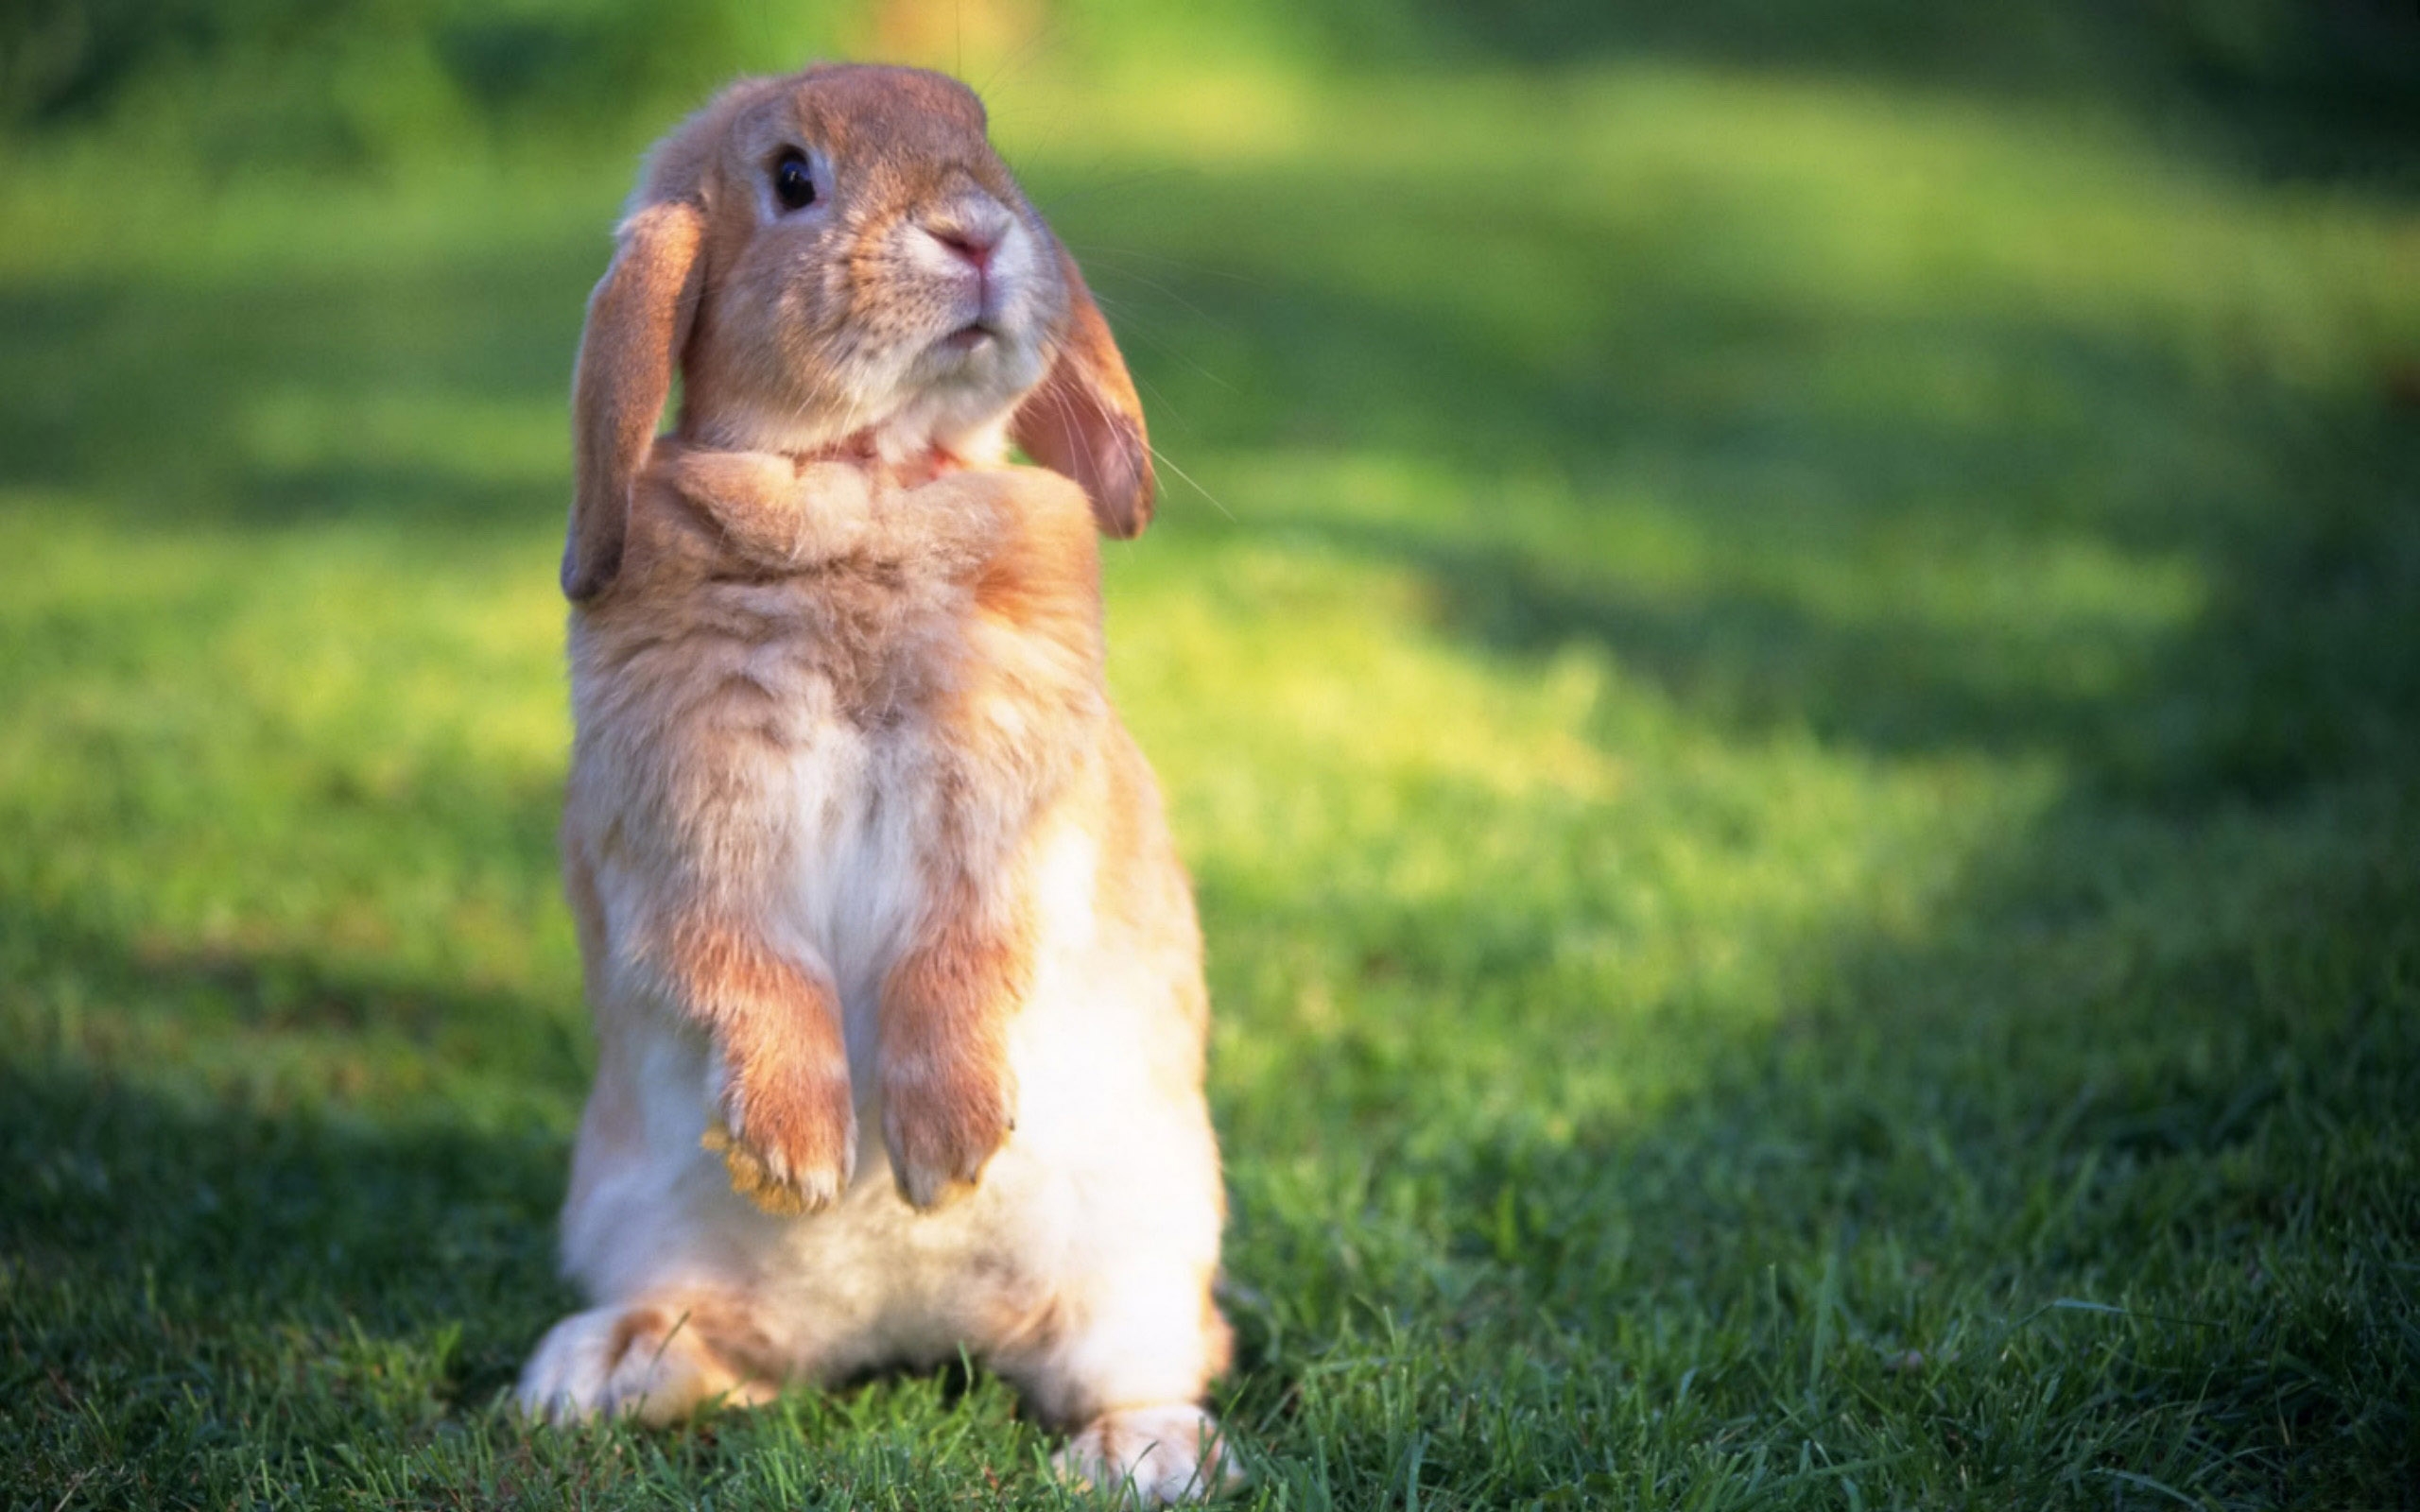 Bunny stands on his hind legs.